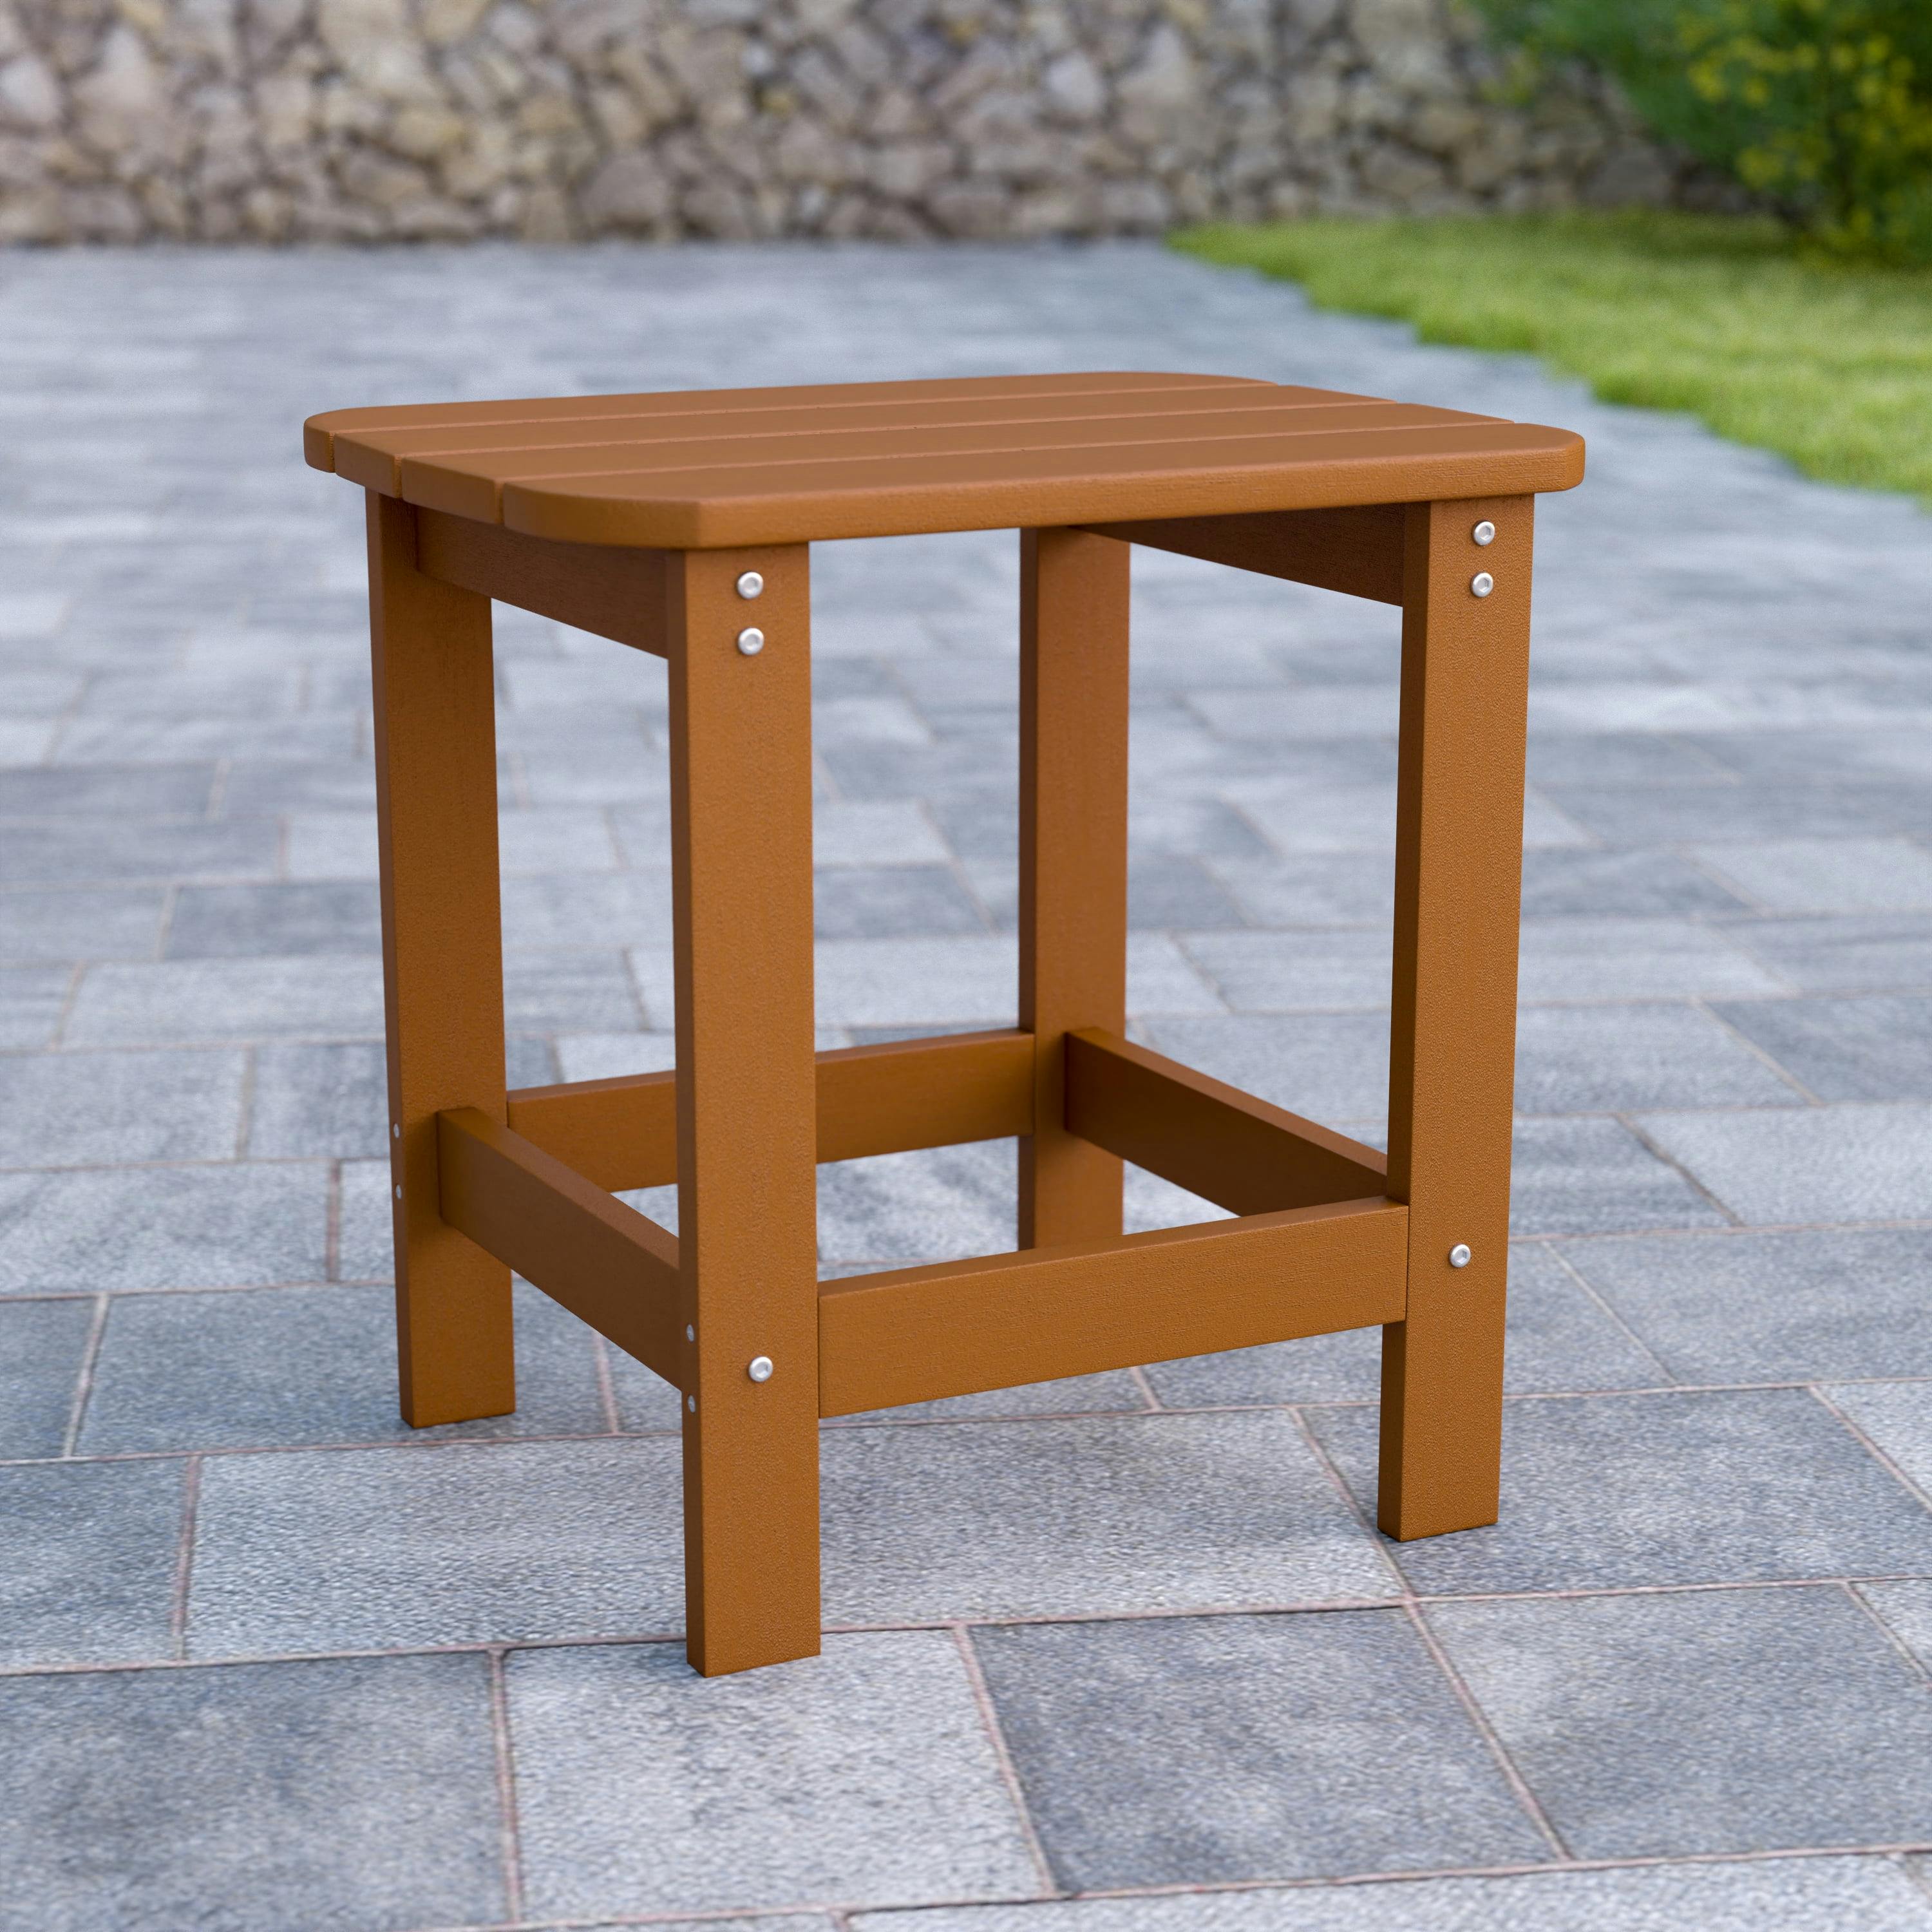 Teak Poly Resin Adirondack Low-Height Side Table